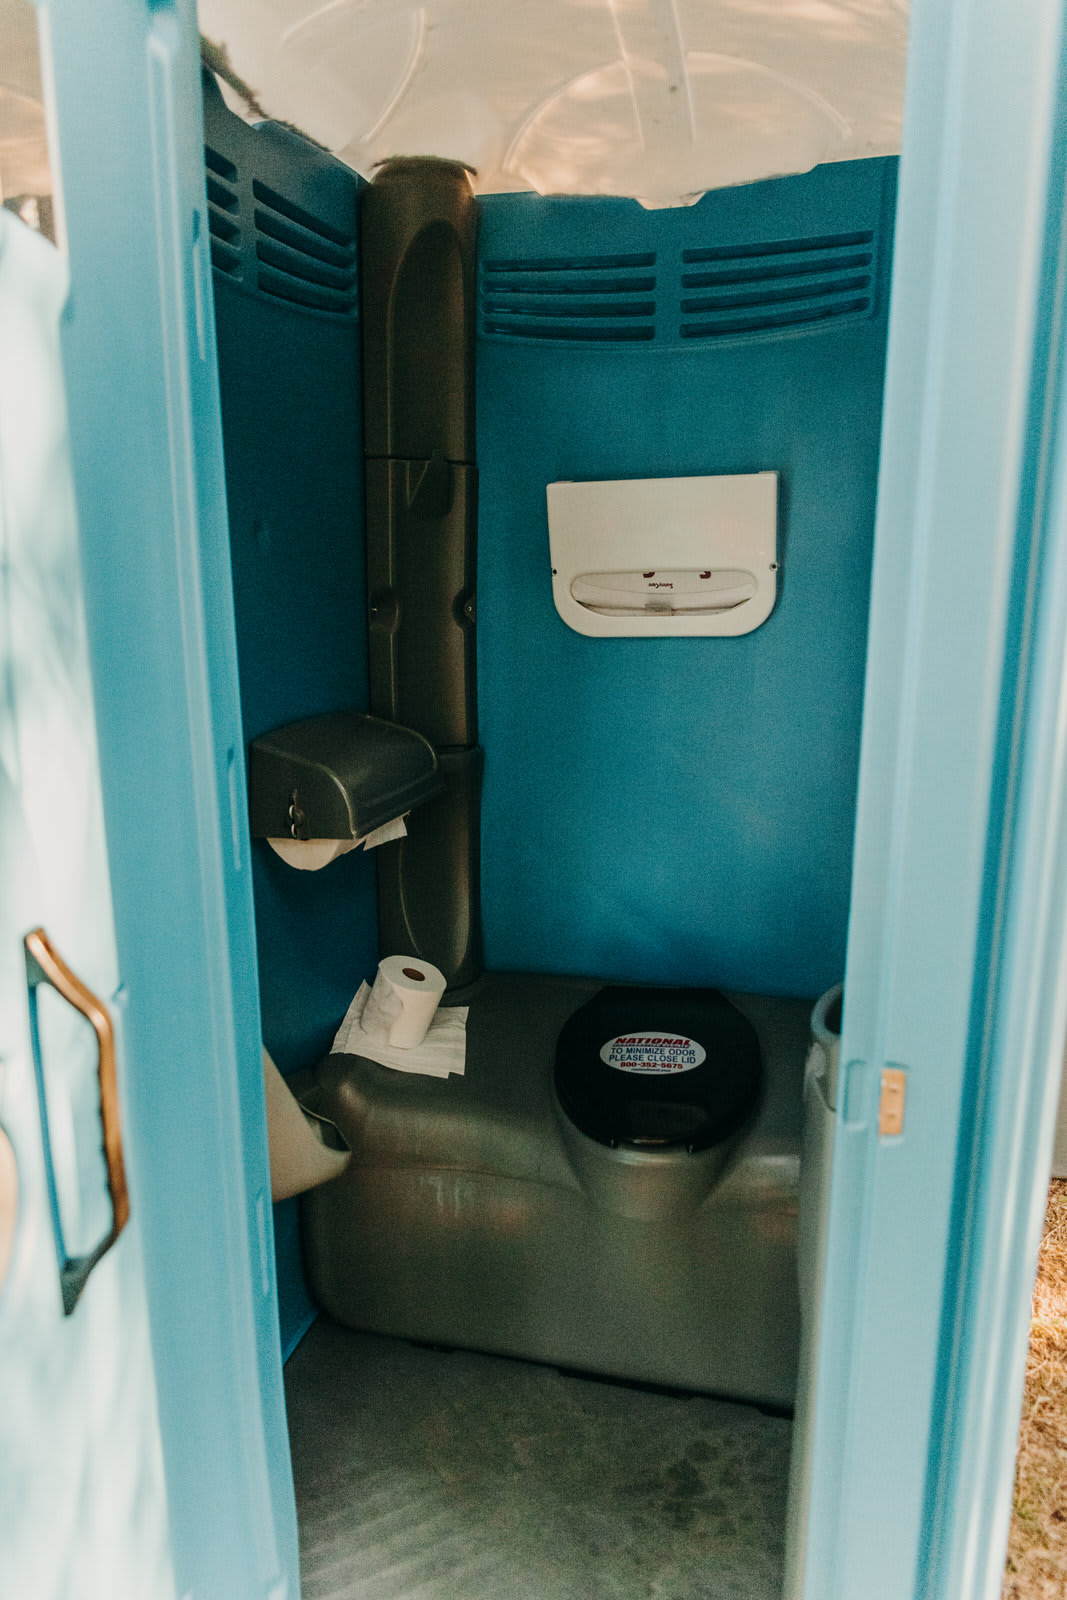 A SUPER clean toilet that even smells good AND has a hand-washing station inside!